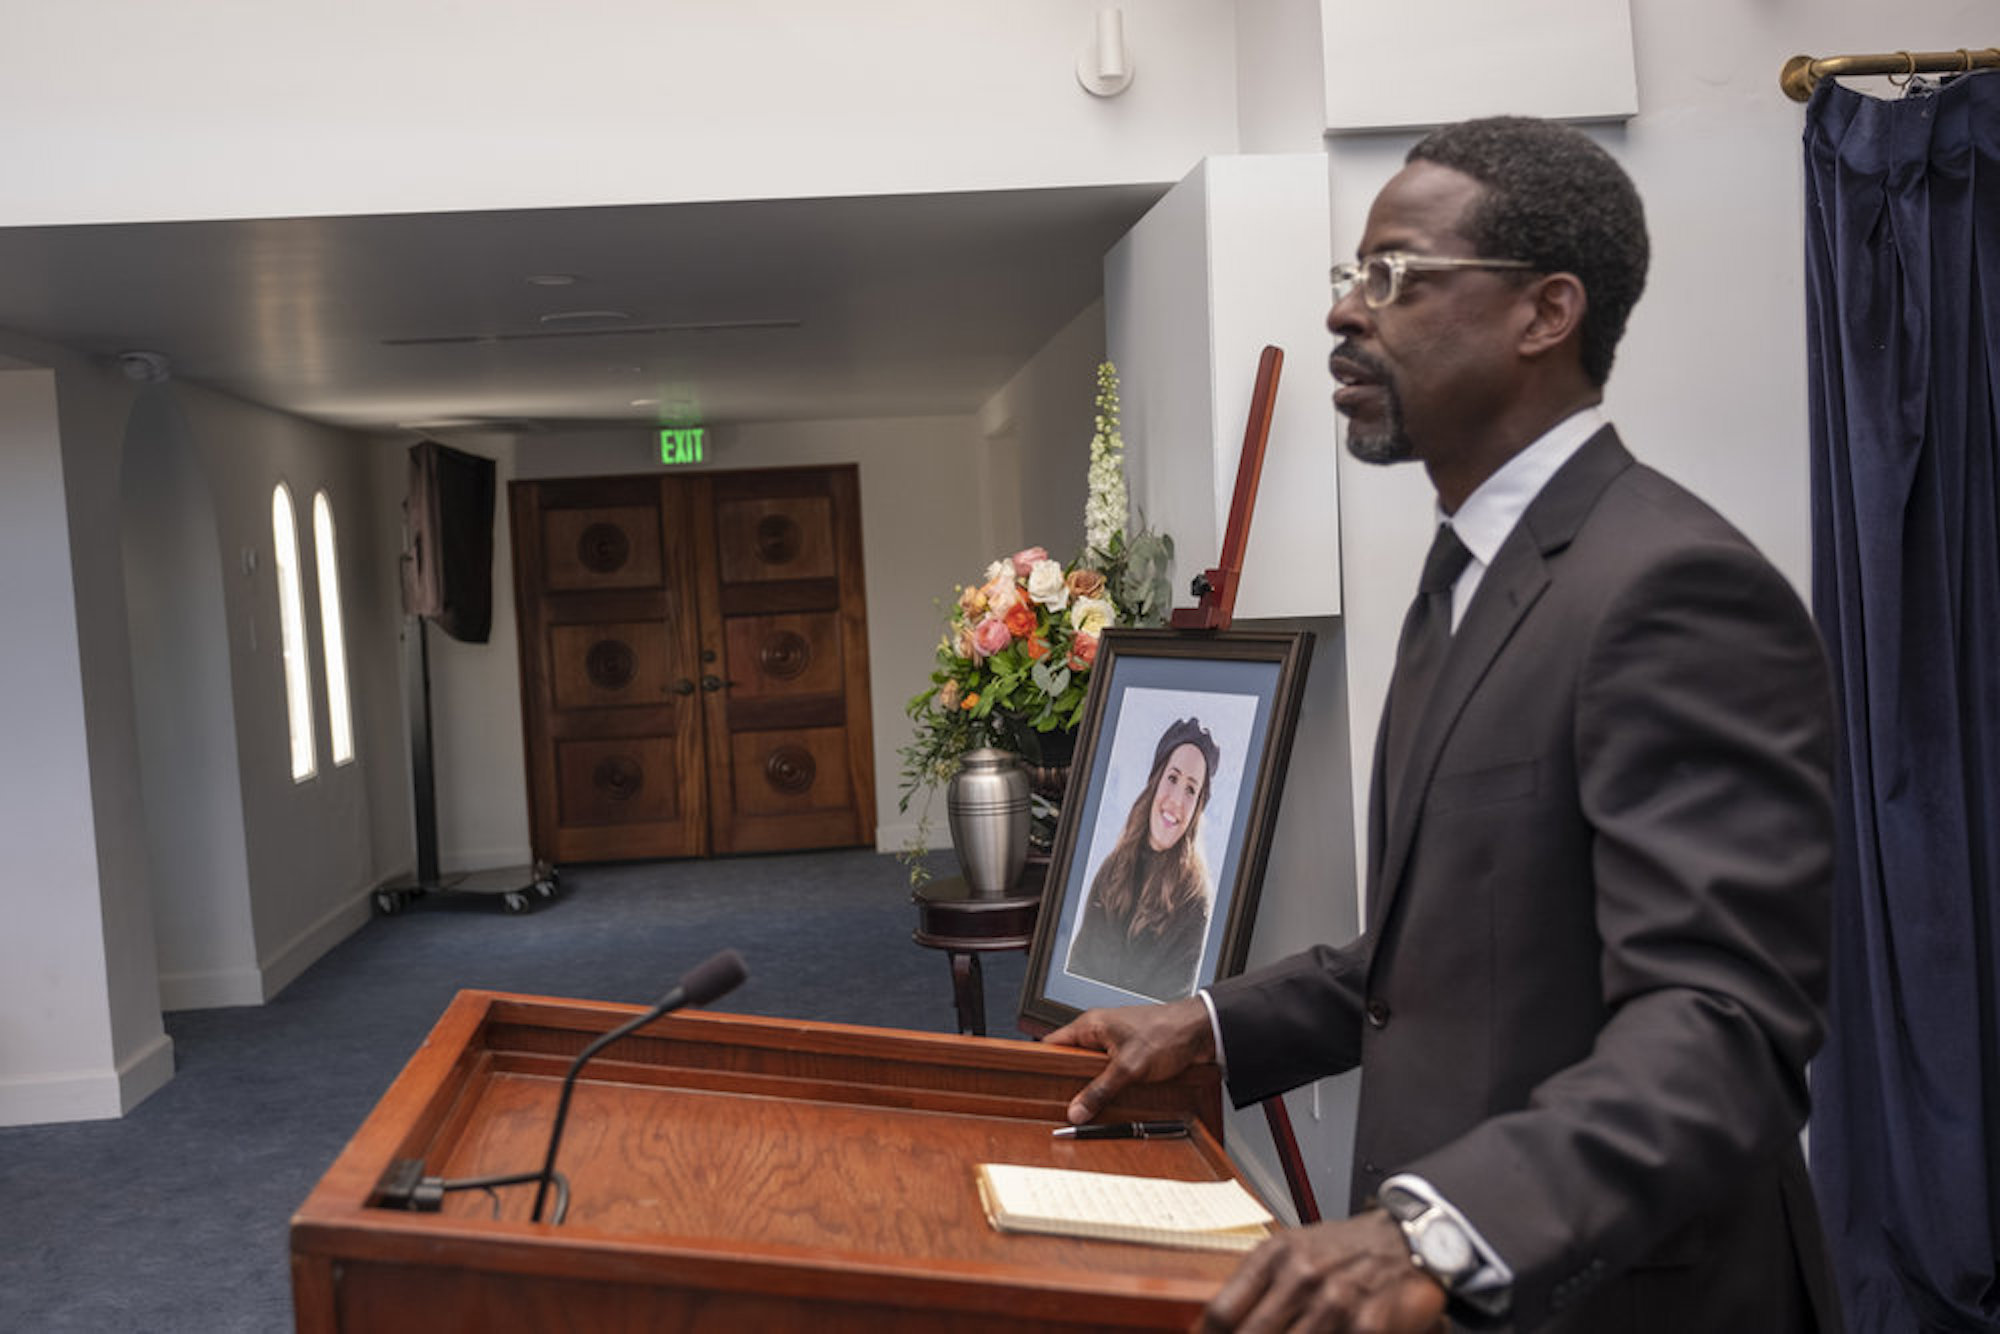 Randall speaking at Rebecca's funeral during the 'This Is Us' Season 6 finale